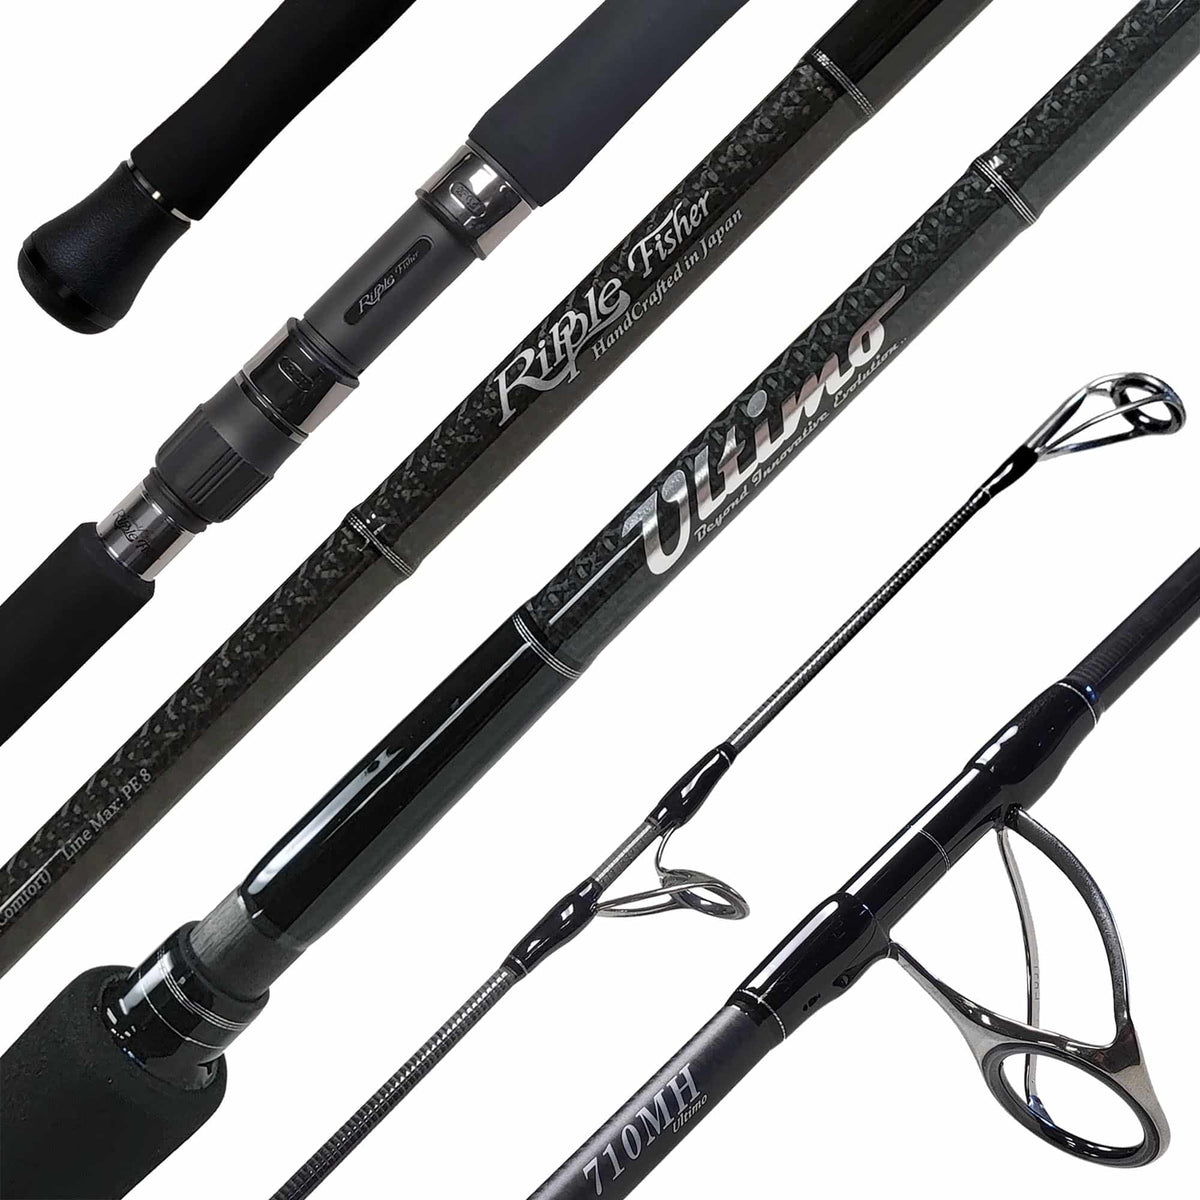 Cheap, Durable, and Sturdy Toray Fishing Rod Blank For All